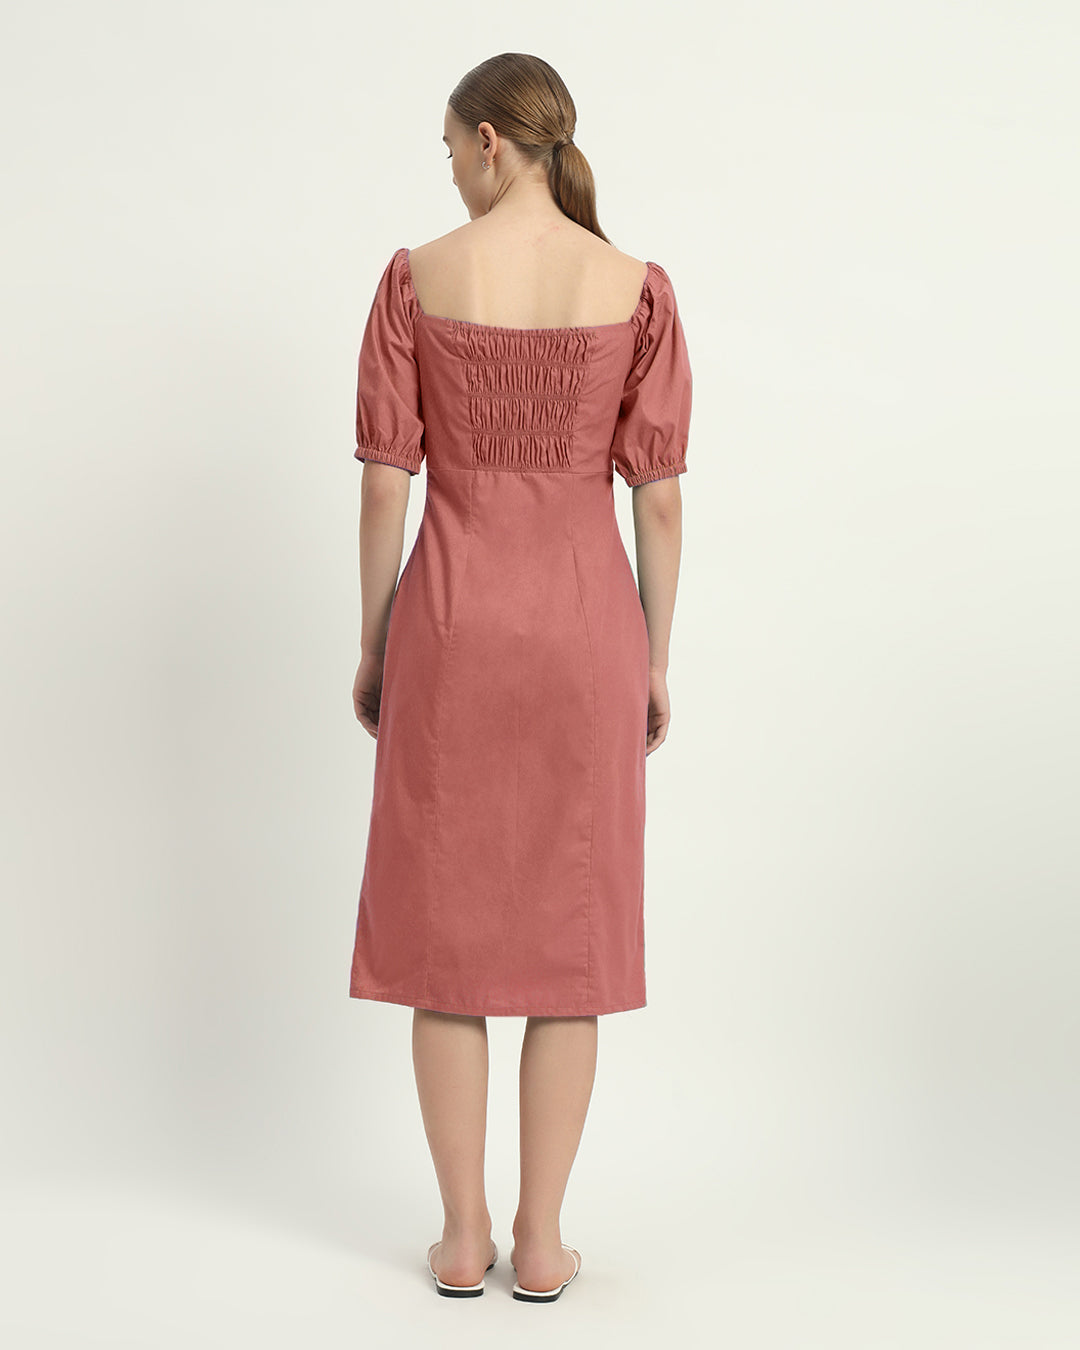 The Ivory Pink Erwin Cotton Dress